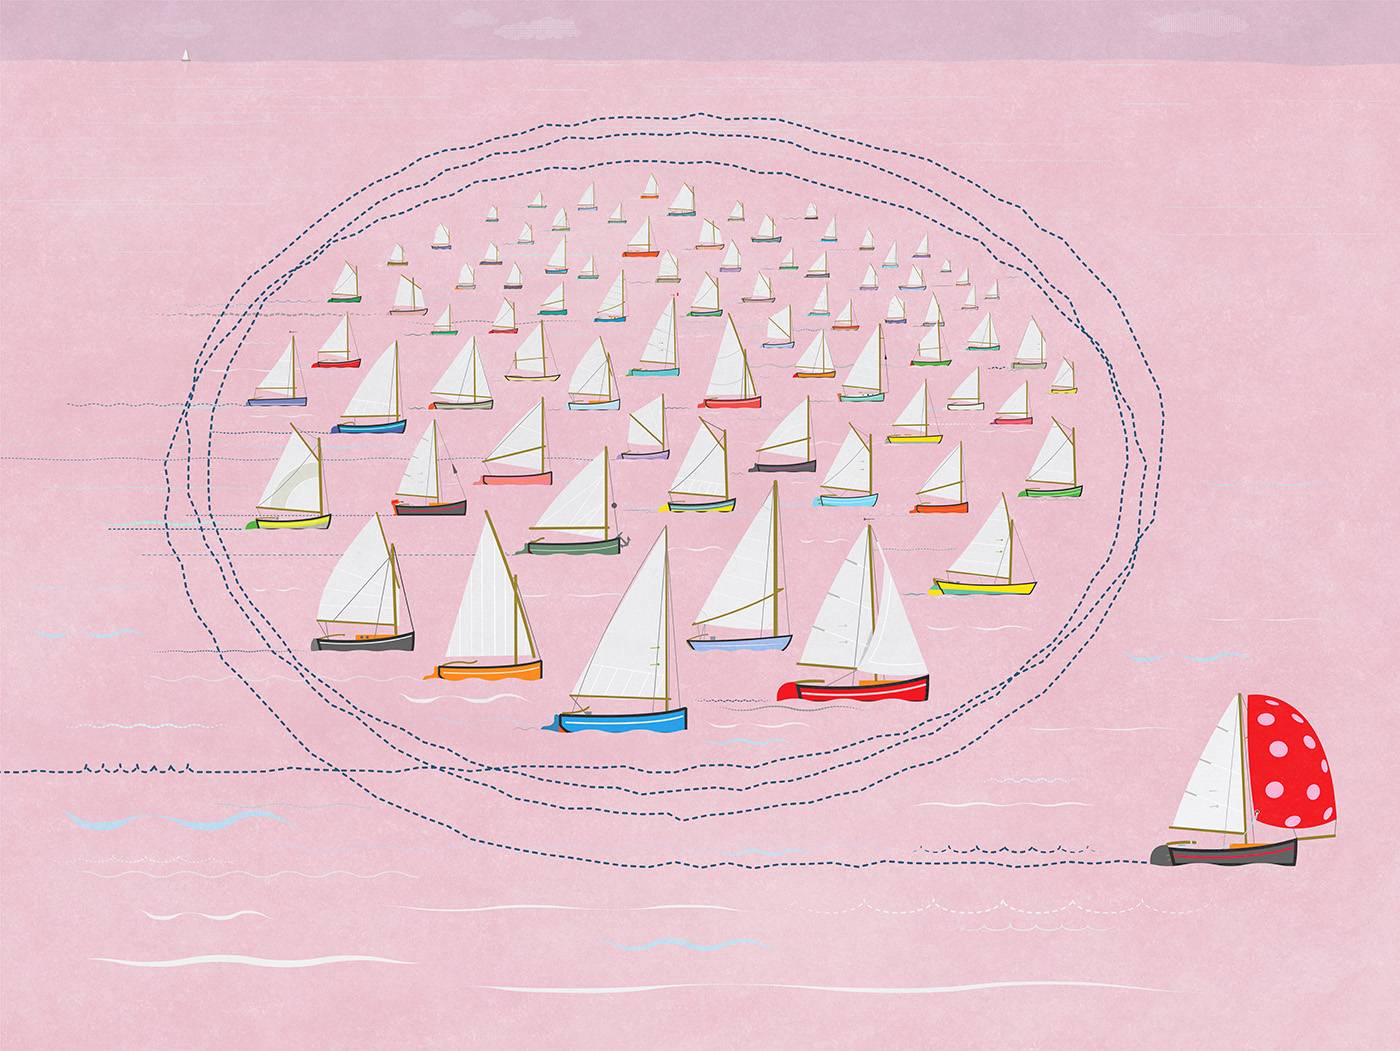 Boat with Red Spinnaker Sail running Rings around the Rest of the Flotilla, Business Strategy Concept, Nautical Theme, Illustration, Concepts & Topics, Fleet of Sailboats, Ahead of the Curve, Looping